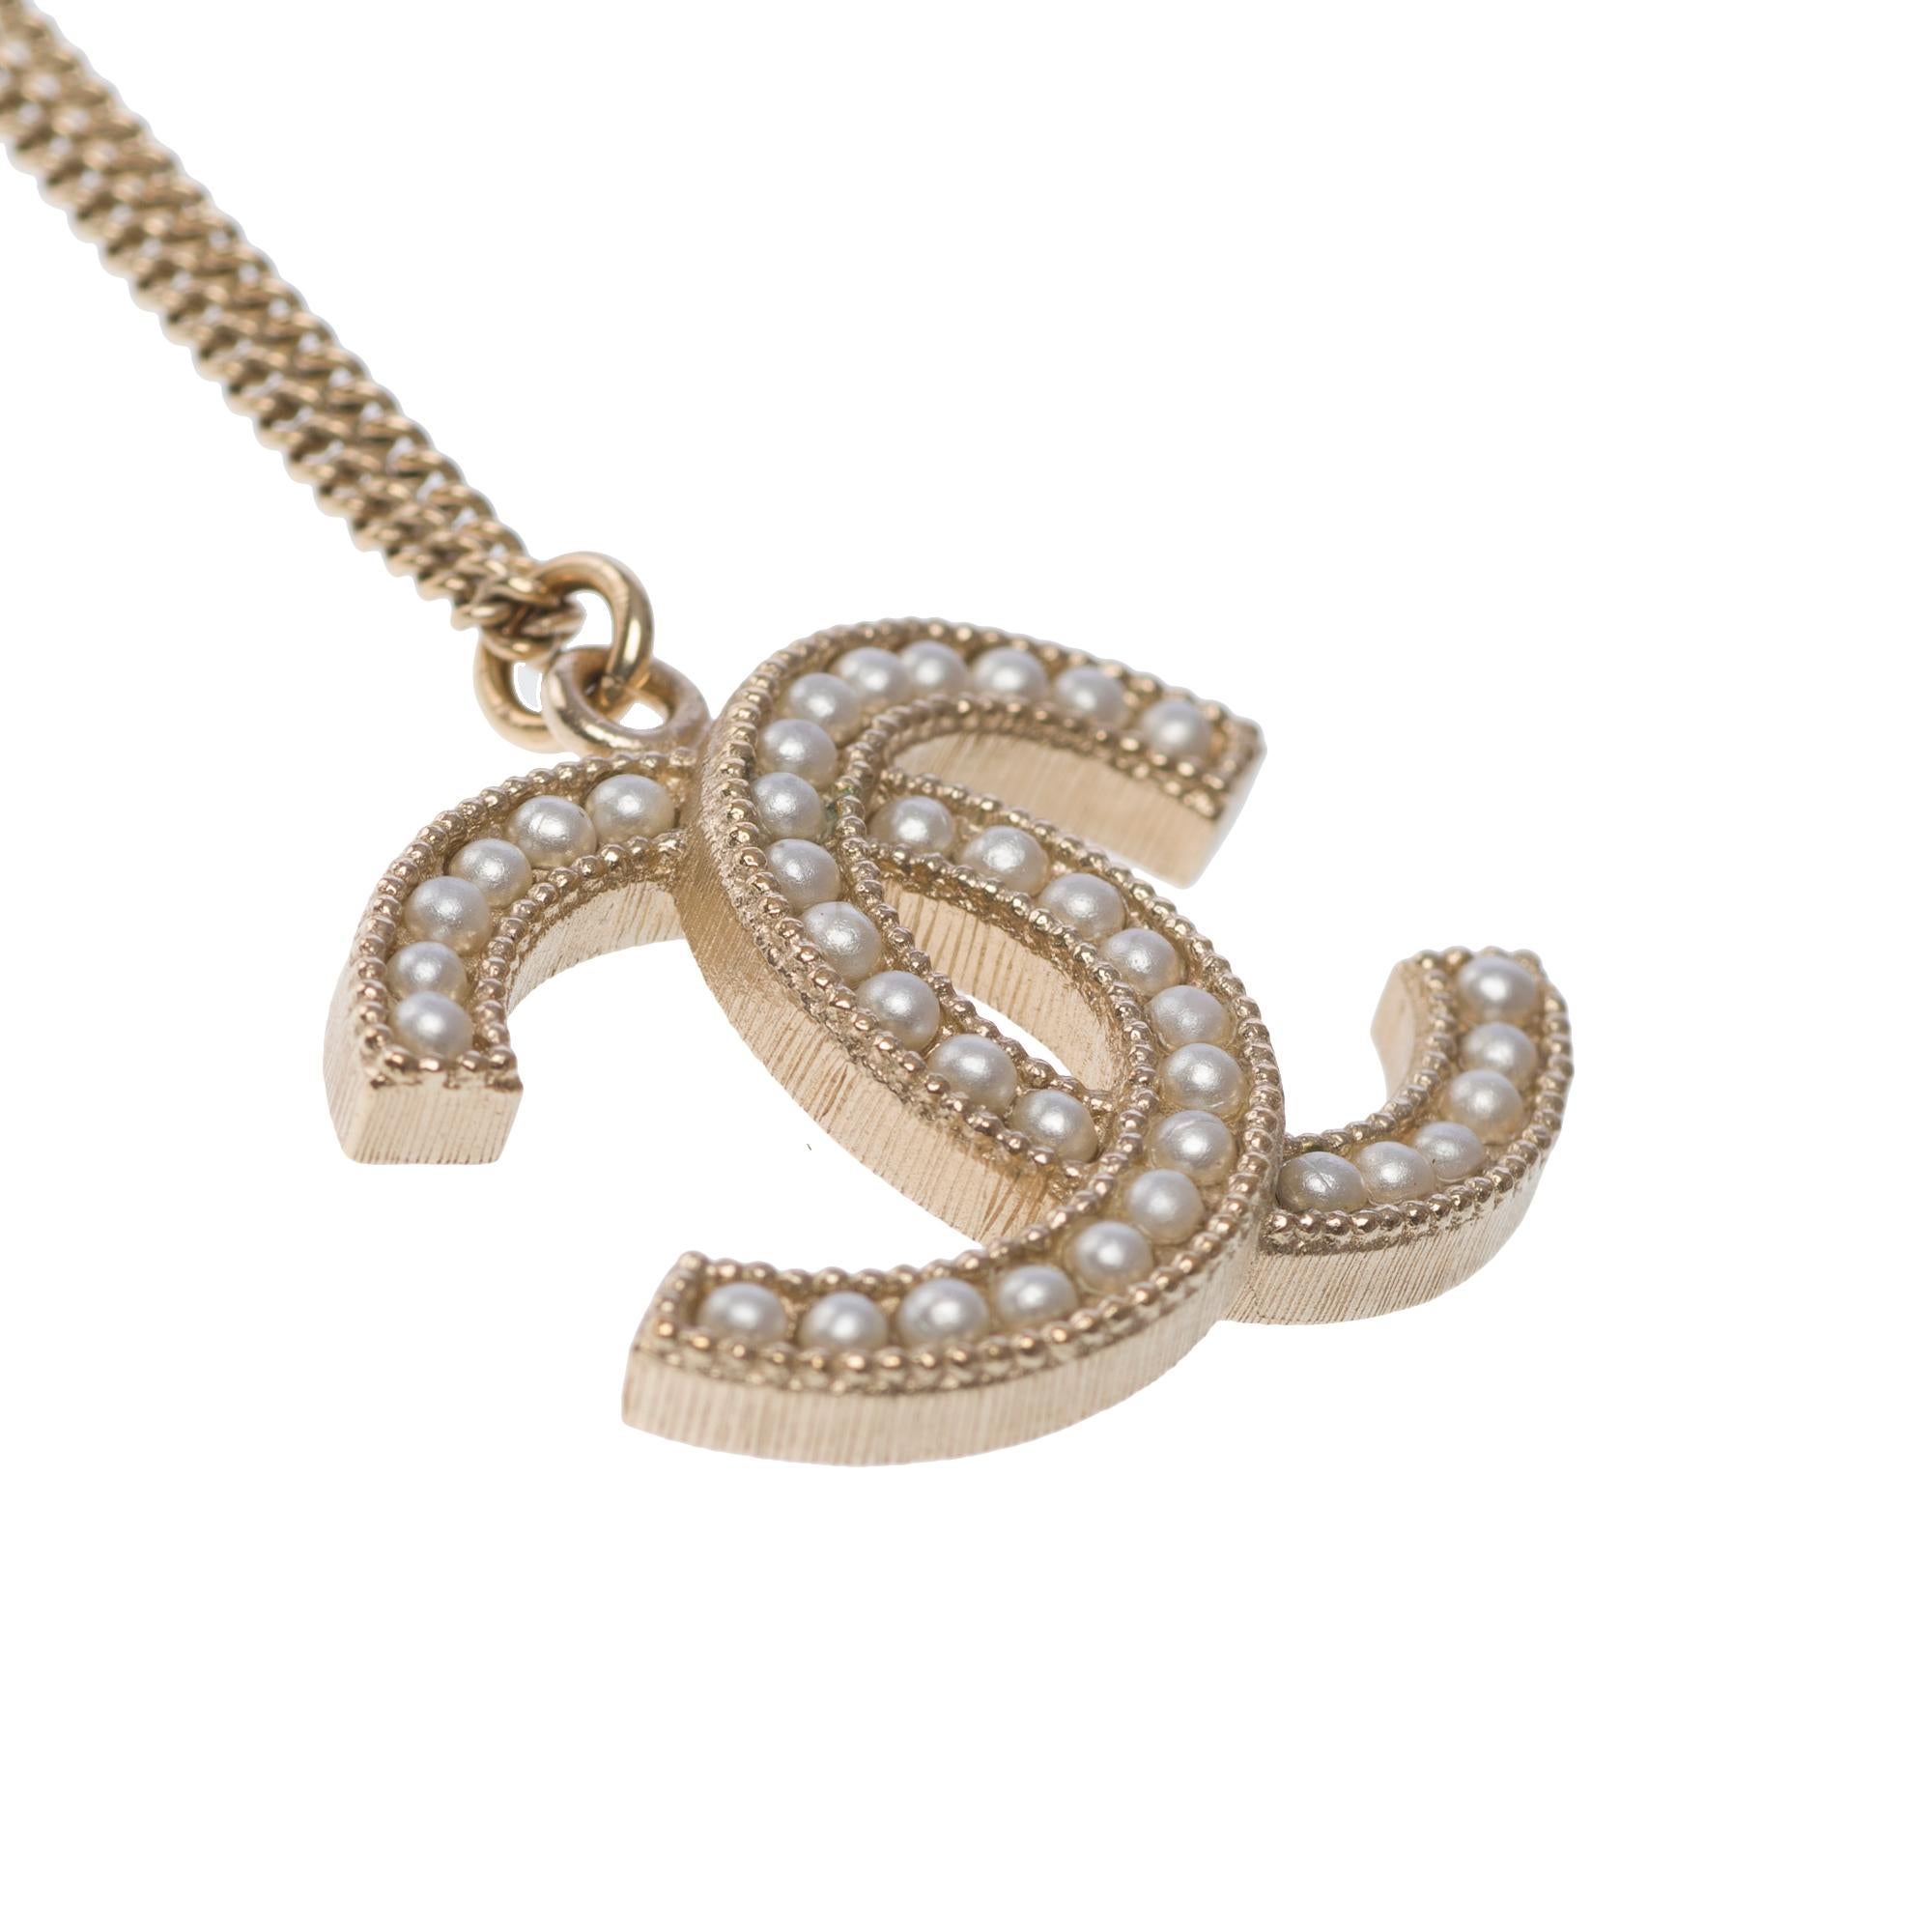 Contemporary  Chanel Necklace CC With Pearl and Gold color metal